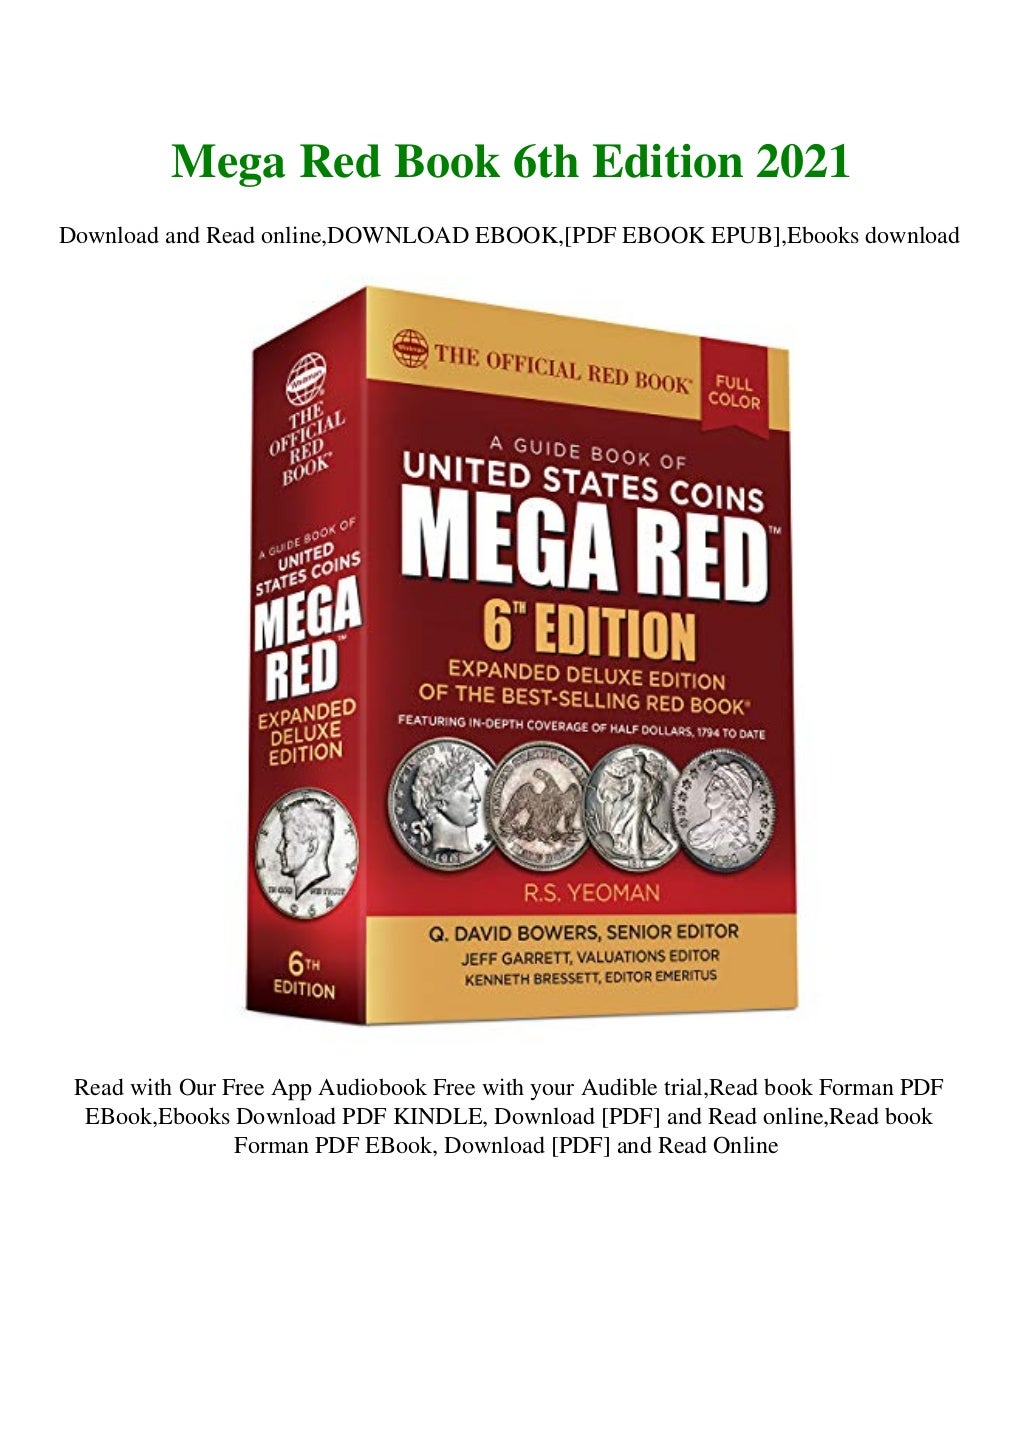 DOWNLOAD FREE Mega Red Book 6th Edition 2021 DOWNLOAD PDF